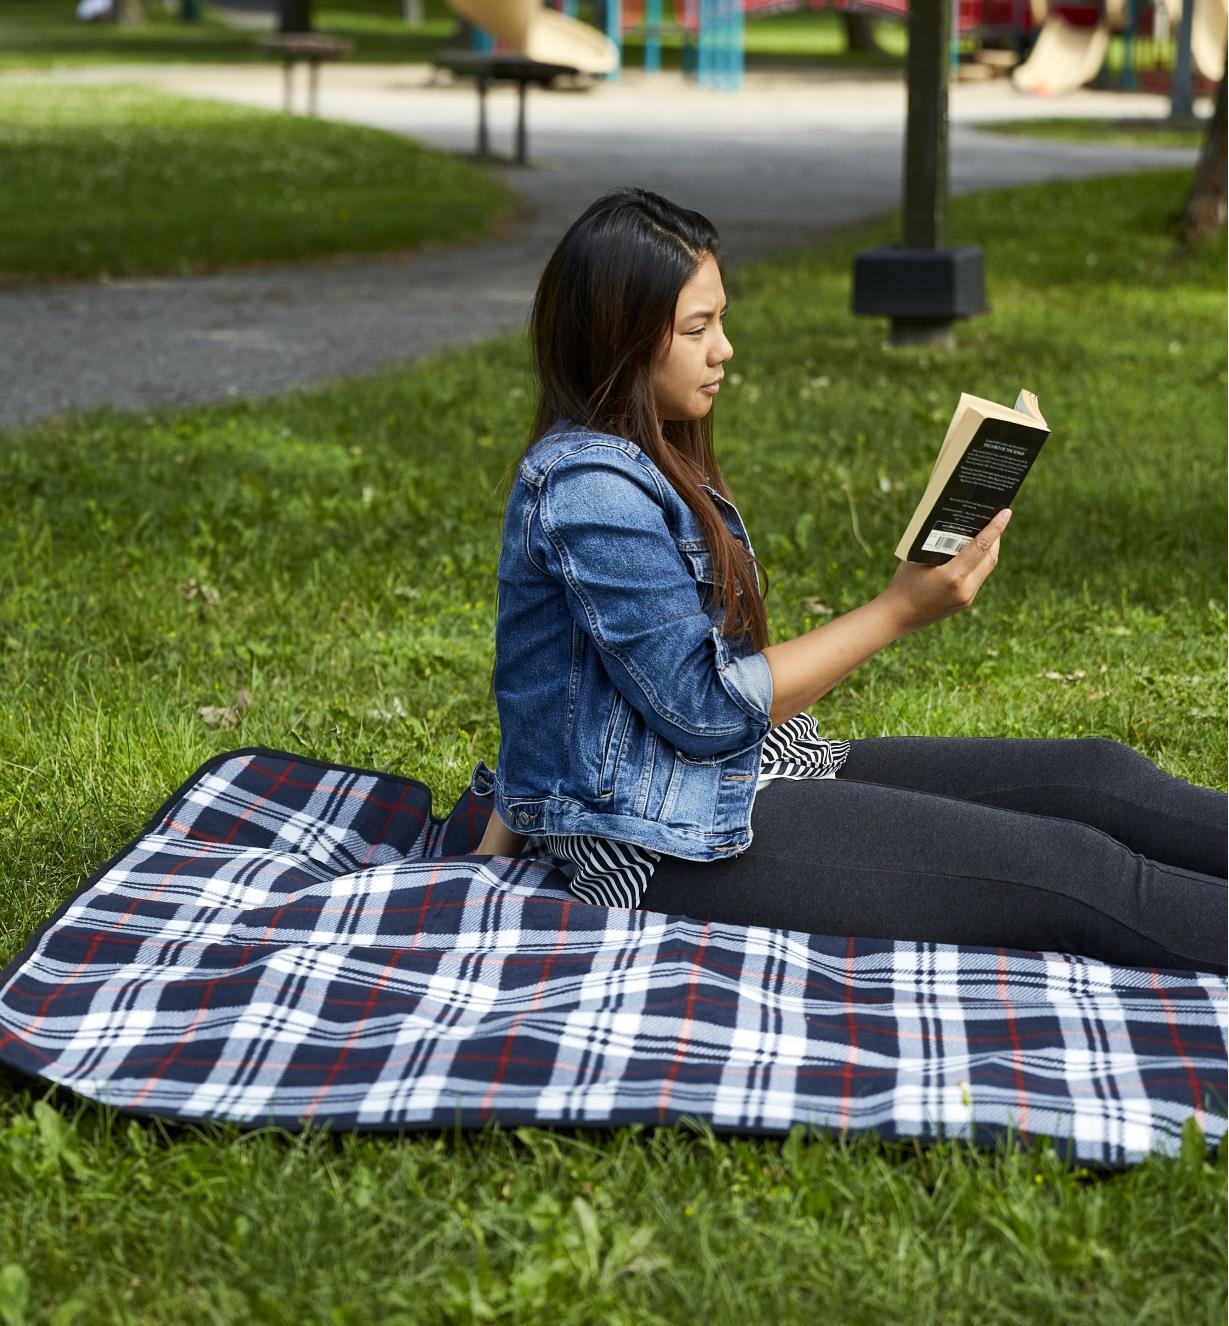 A person reads a book while sitting on the tartan outdoor lined blanket